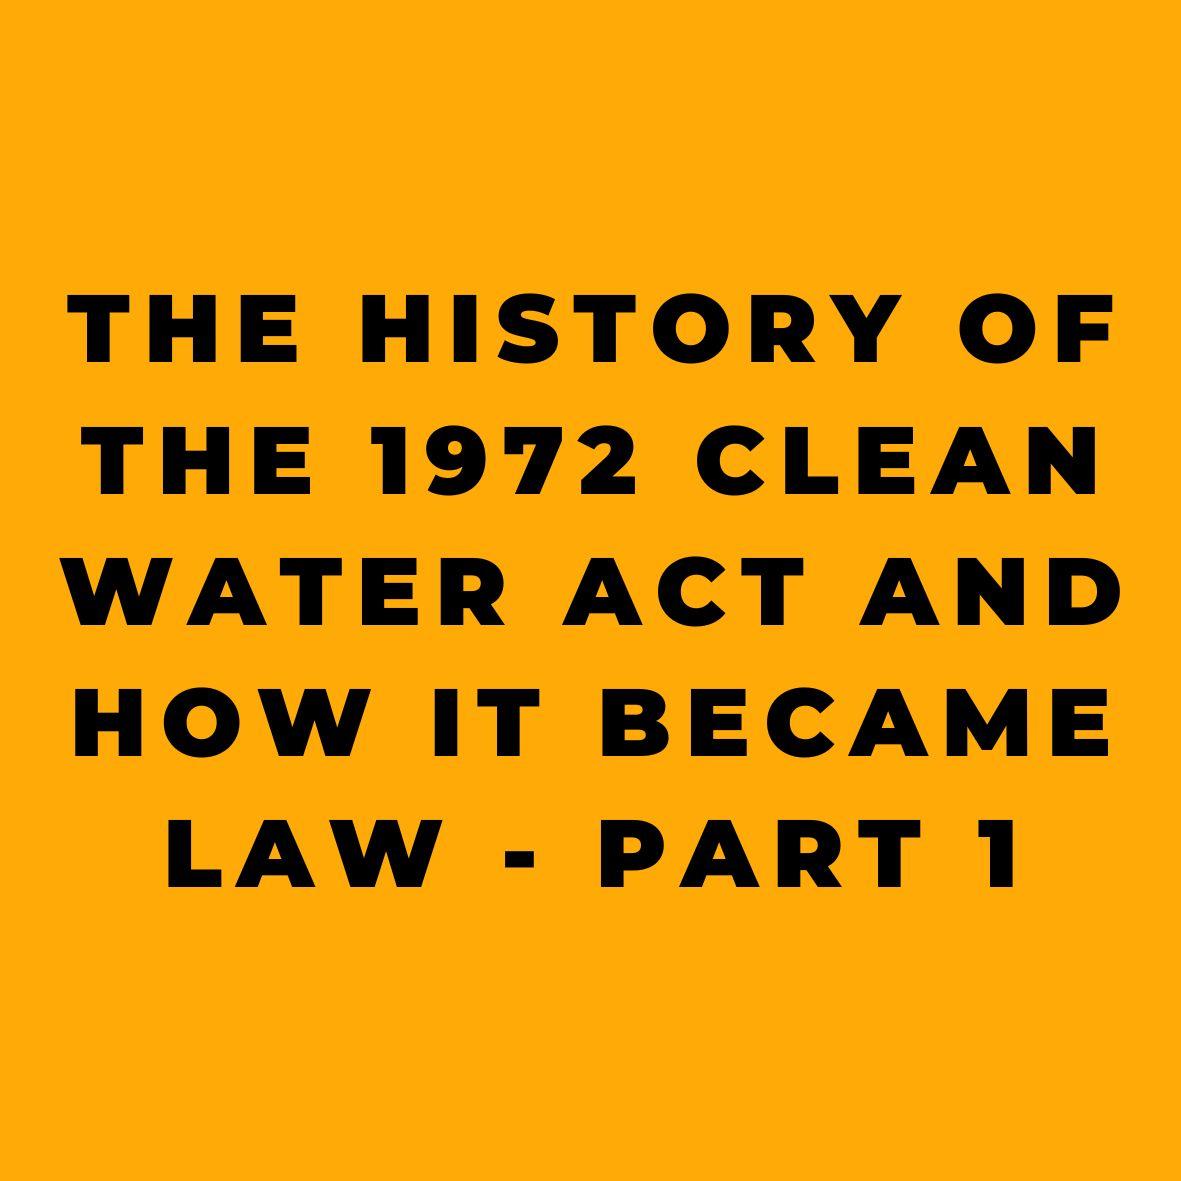 The History of the 1972 Clean Water Act And How it Became Law Part 1